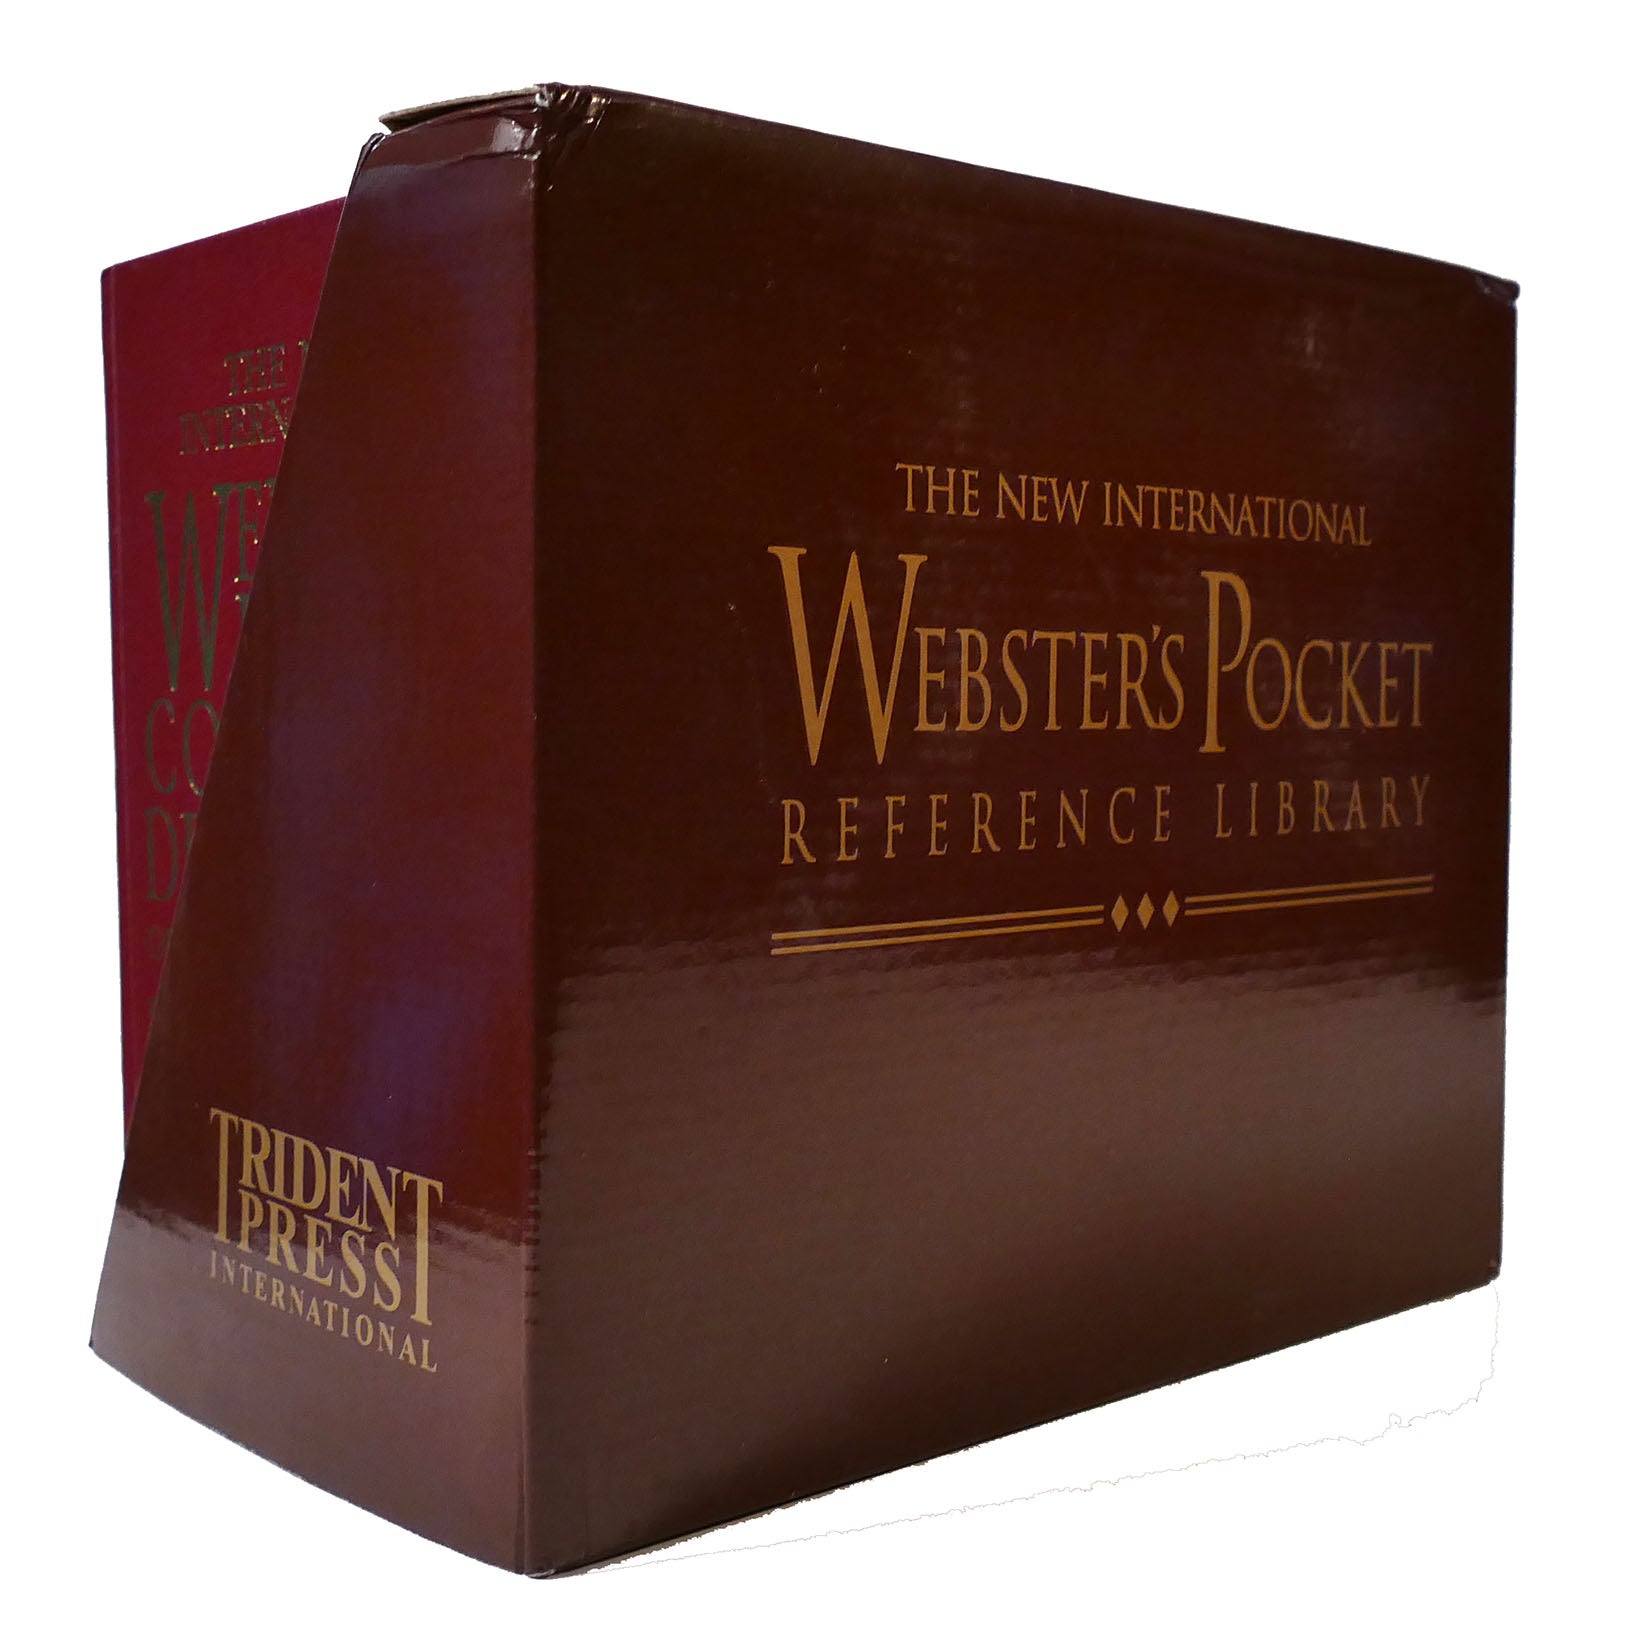 THE NEW INTERNATIONAL WEBSTER'S POCKET REFERENCE LIBRARY 8 VOLUME SET by  Trident on Rare Book Cellar